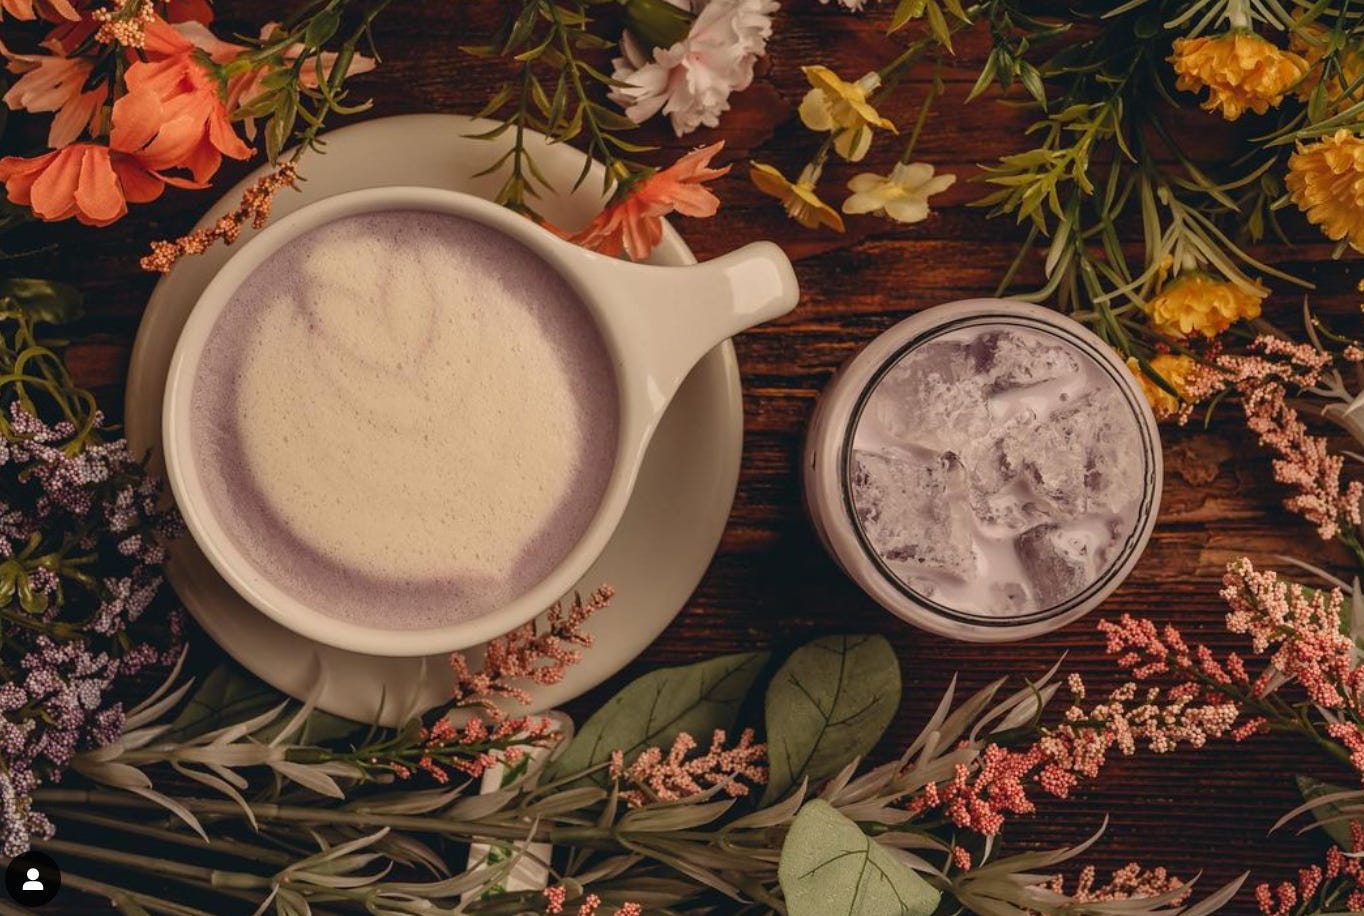 Overhead view of a purple color latte and iced latte made from a taro root powder. Drinks are surrounded by spring flowers on a dark brown stained table.